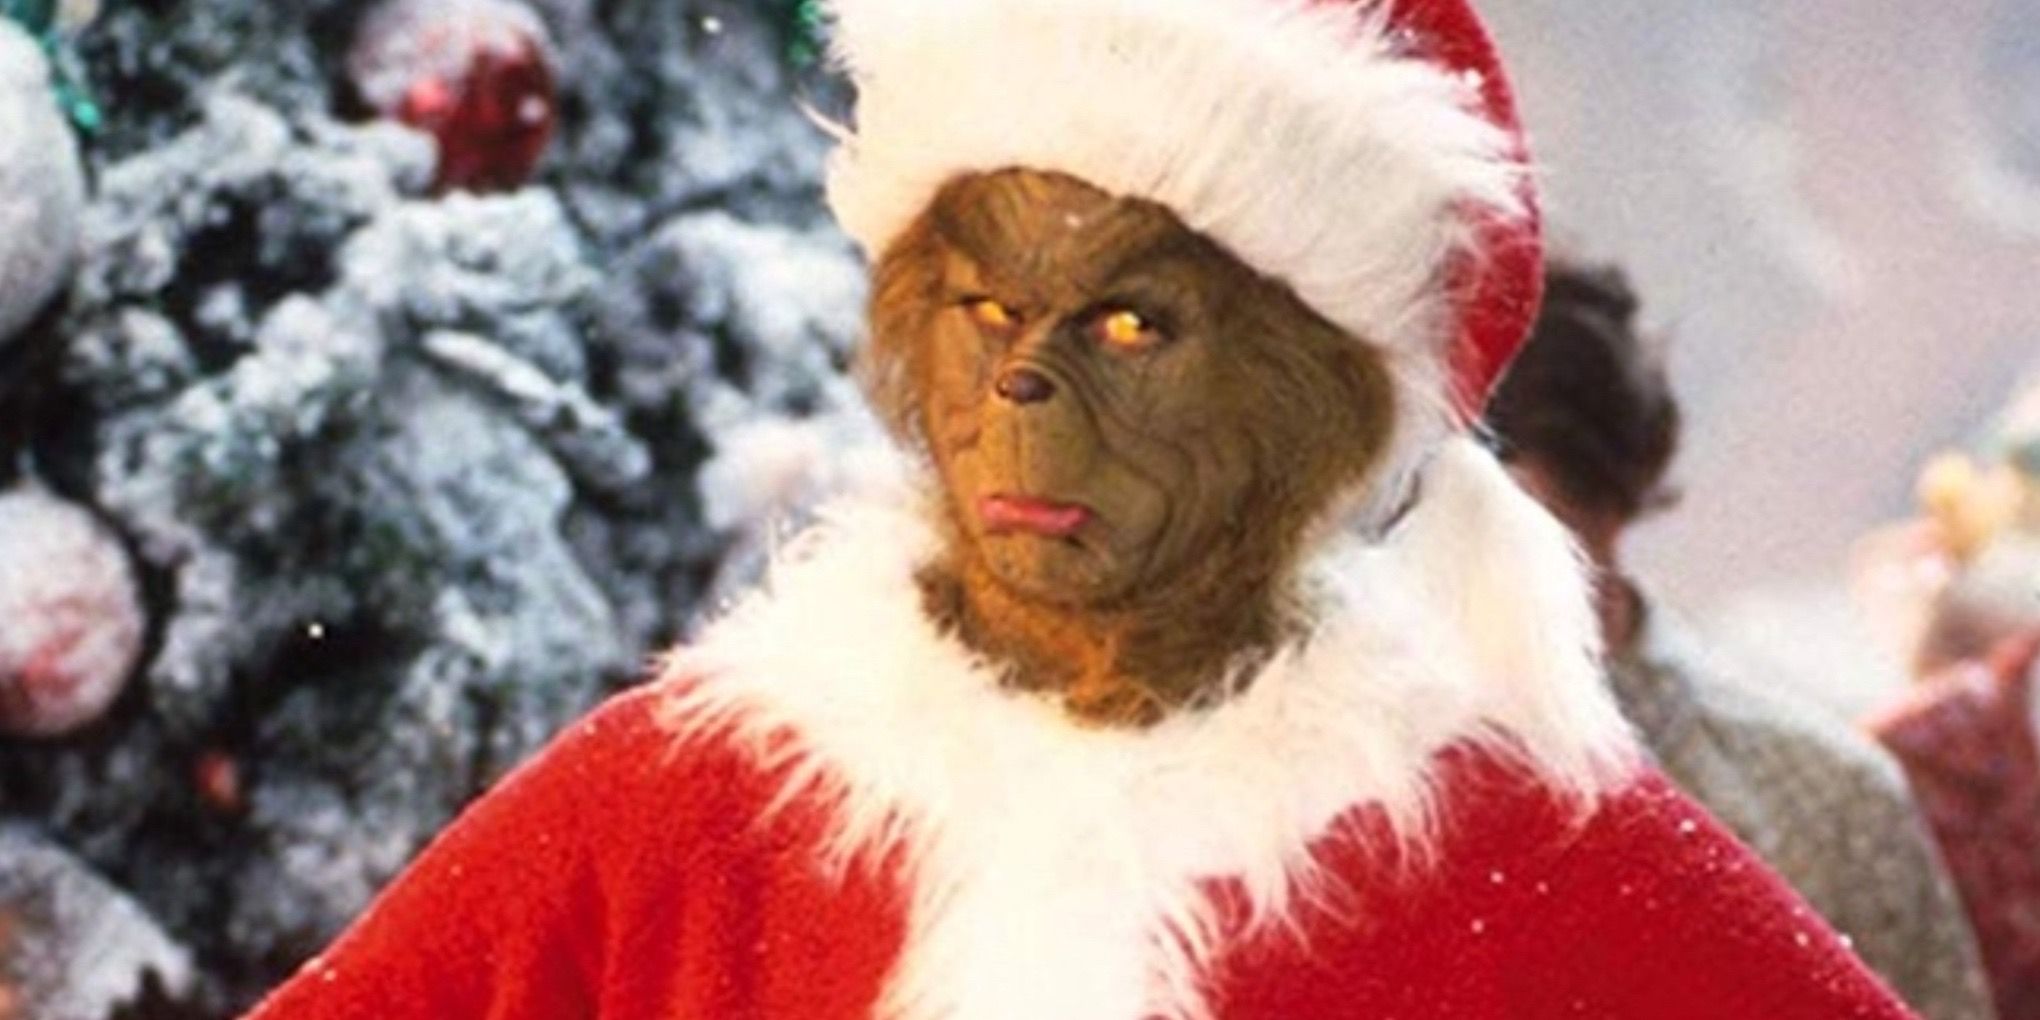 Jim Carrey as The Grinch in Dr. Seuss' How The Grinch Stole Christmas (2000)